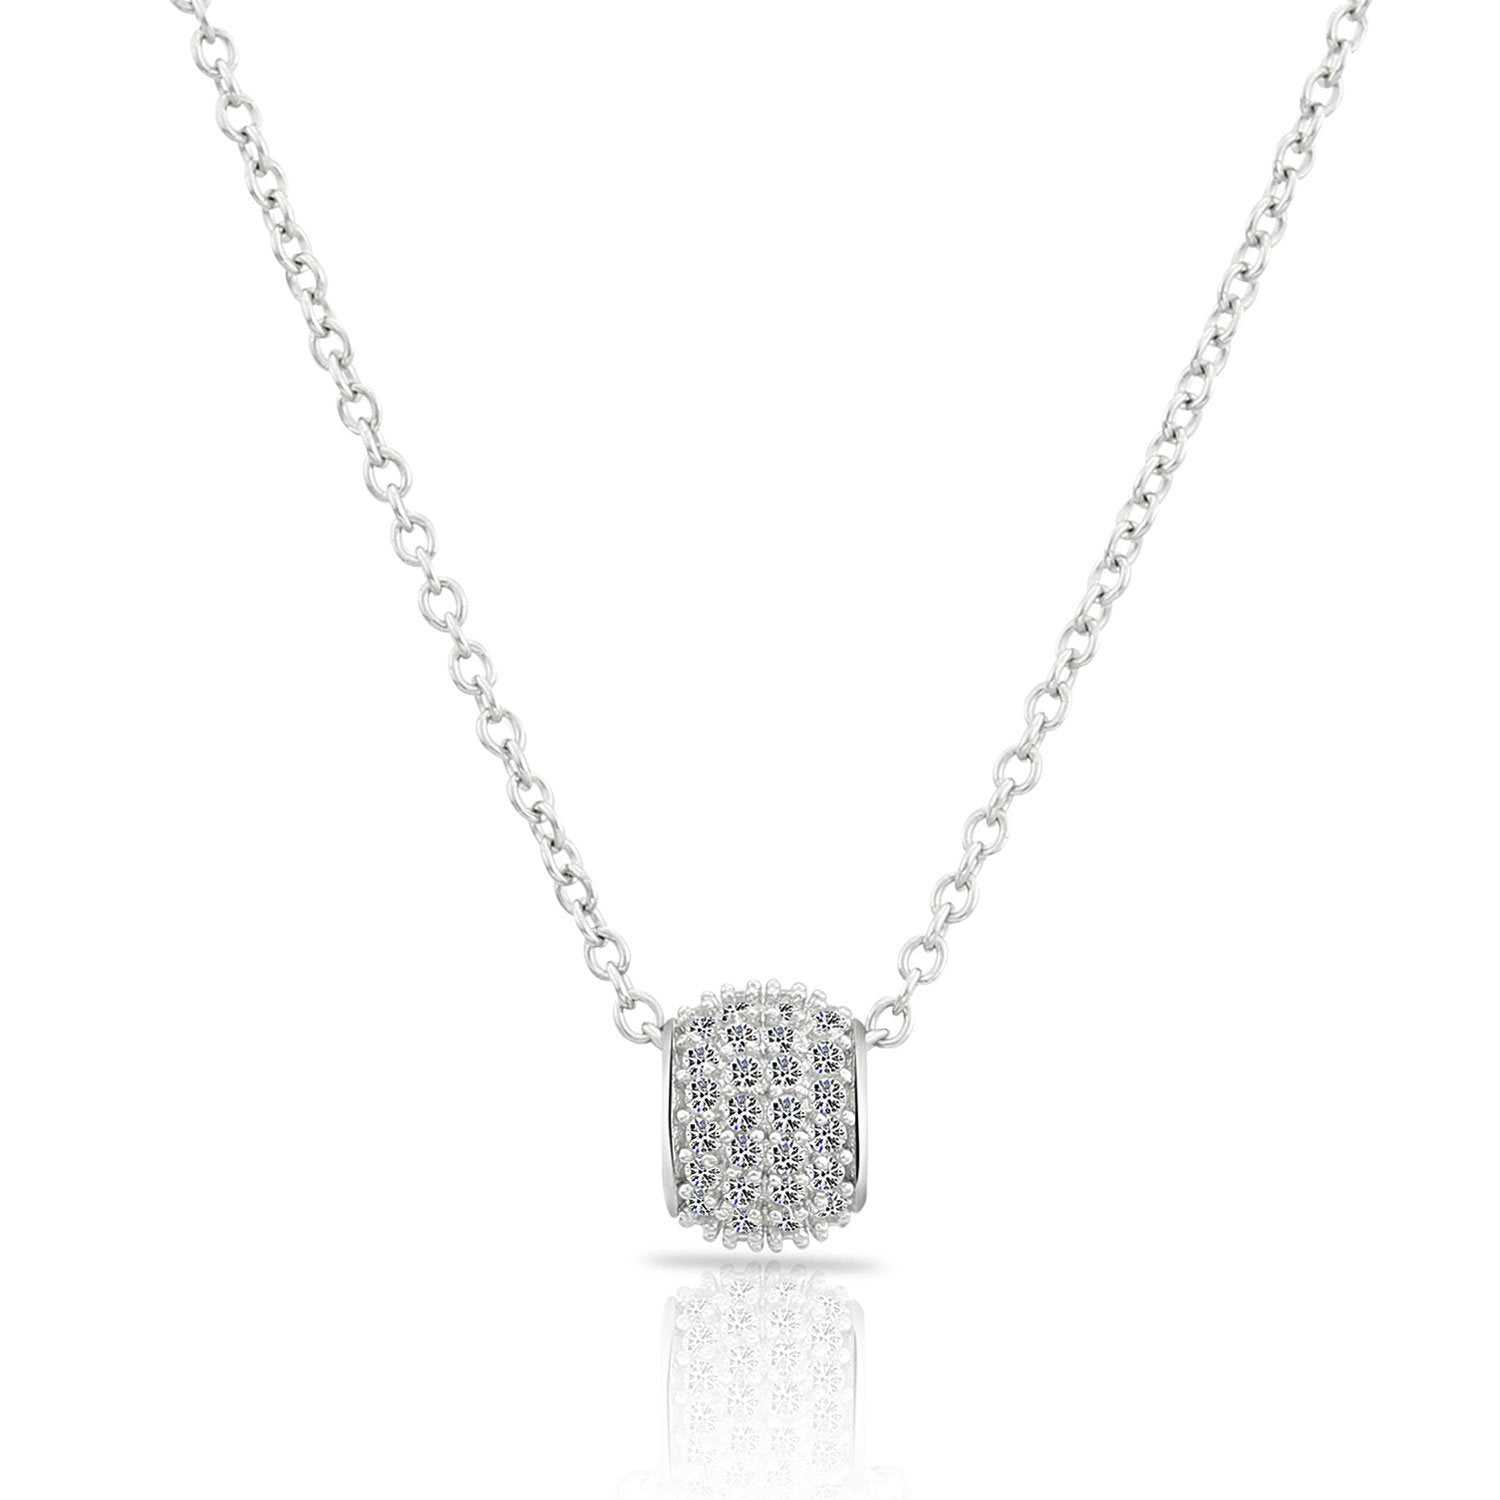 CZ Small Sparkle Ball Charm Necklace in Sterling Silver